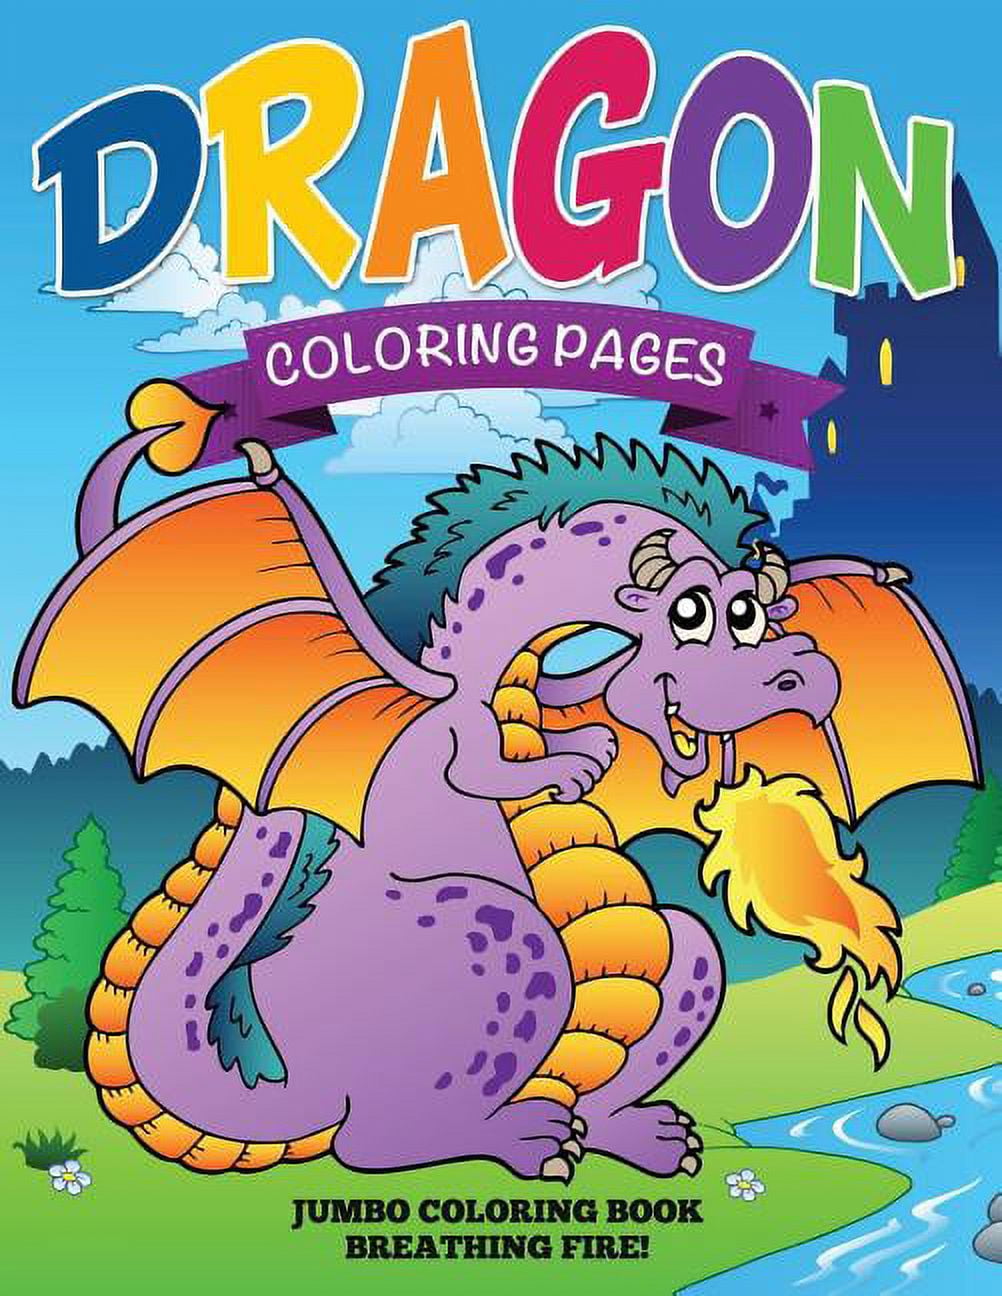 Dragon Coloring Pages (Jumbo Coloring Book - Breathing Fire ...